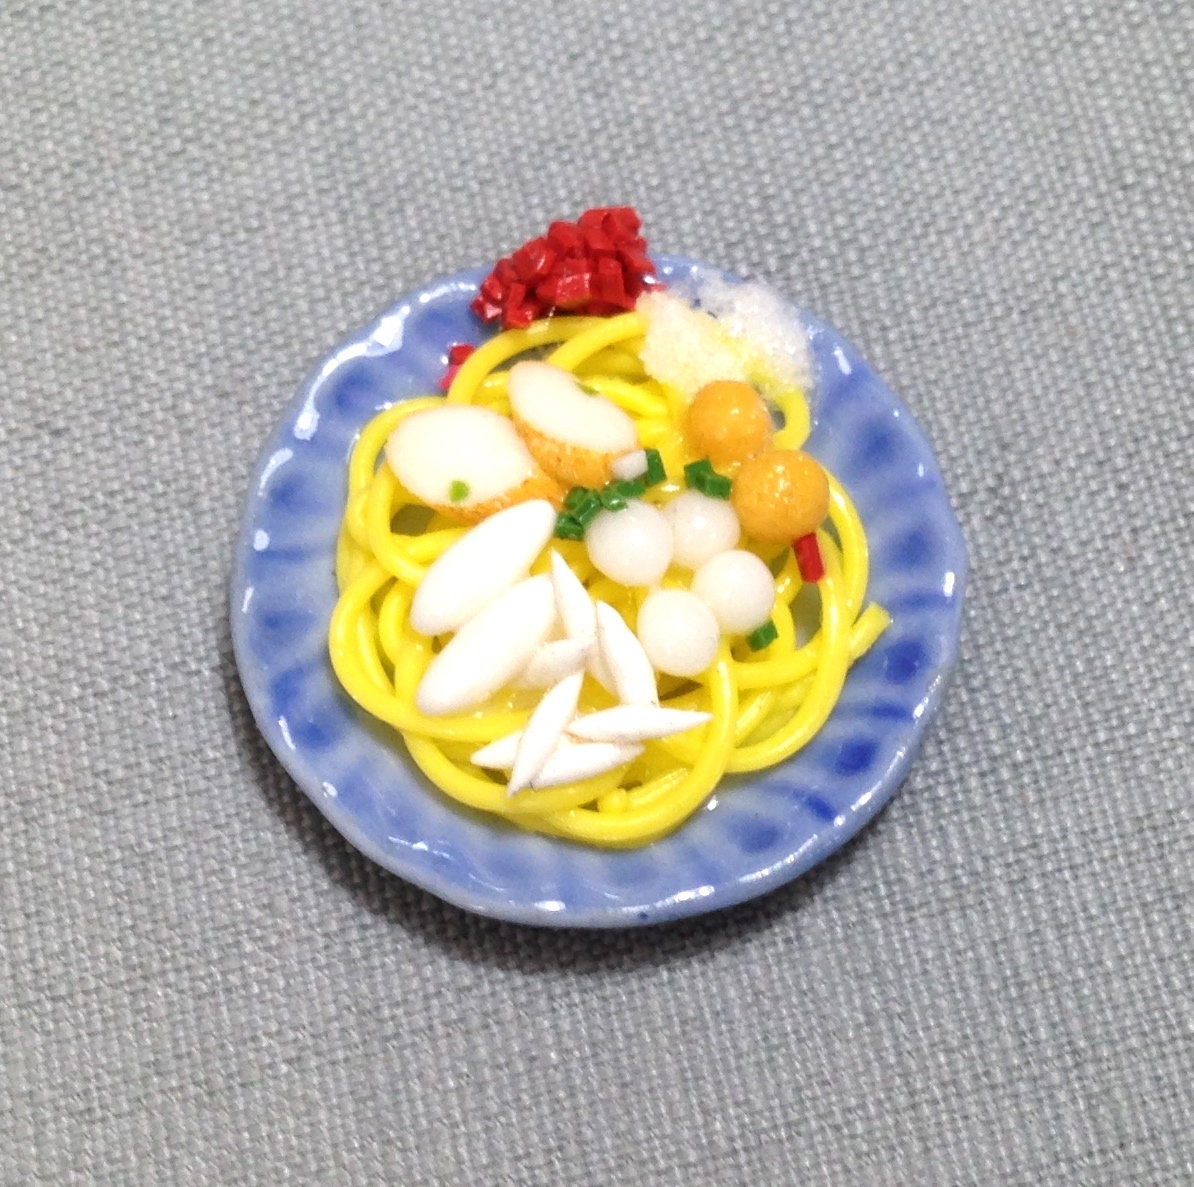 Miniature Dollhouse Seafood Fish Spaghettis Noodles Clay Polymer Tiny Food Supply Cute Small Dish Plate Ceramic Jewelry Supplies Decor 1/12